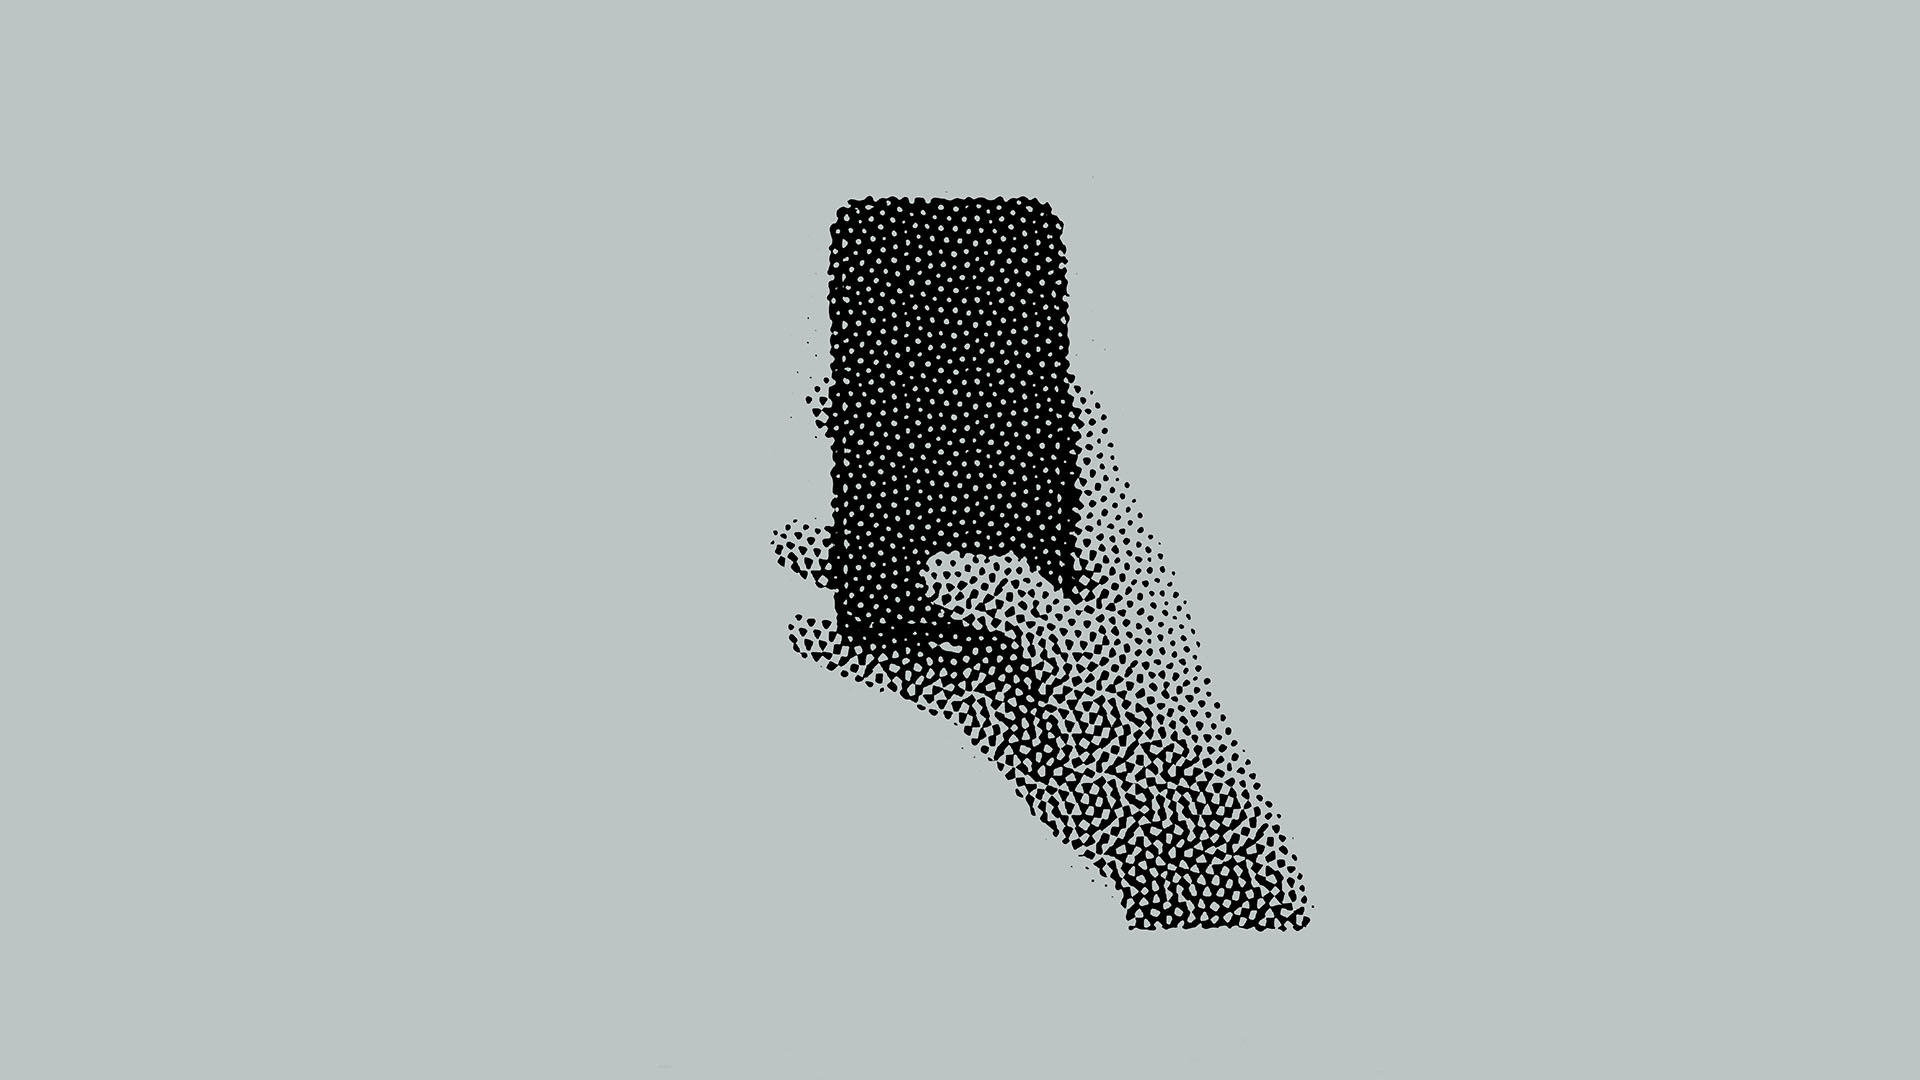 Image of a hand holding a smartphone